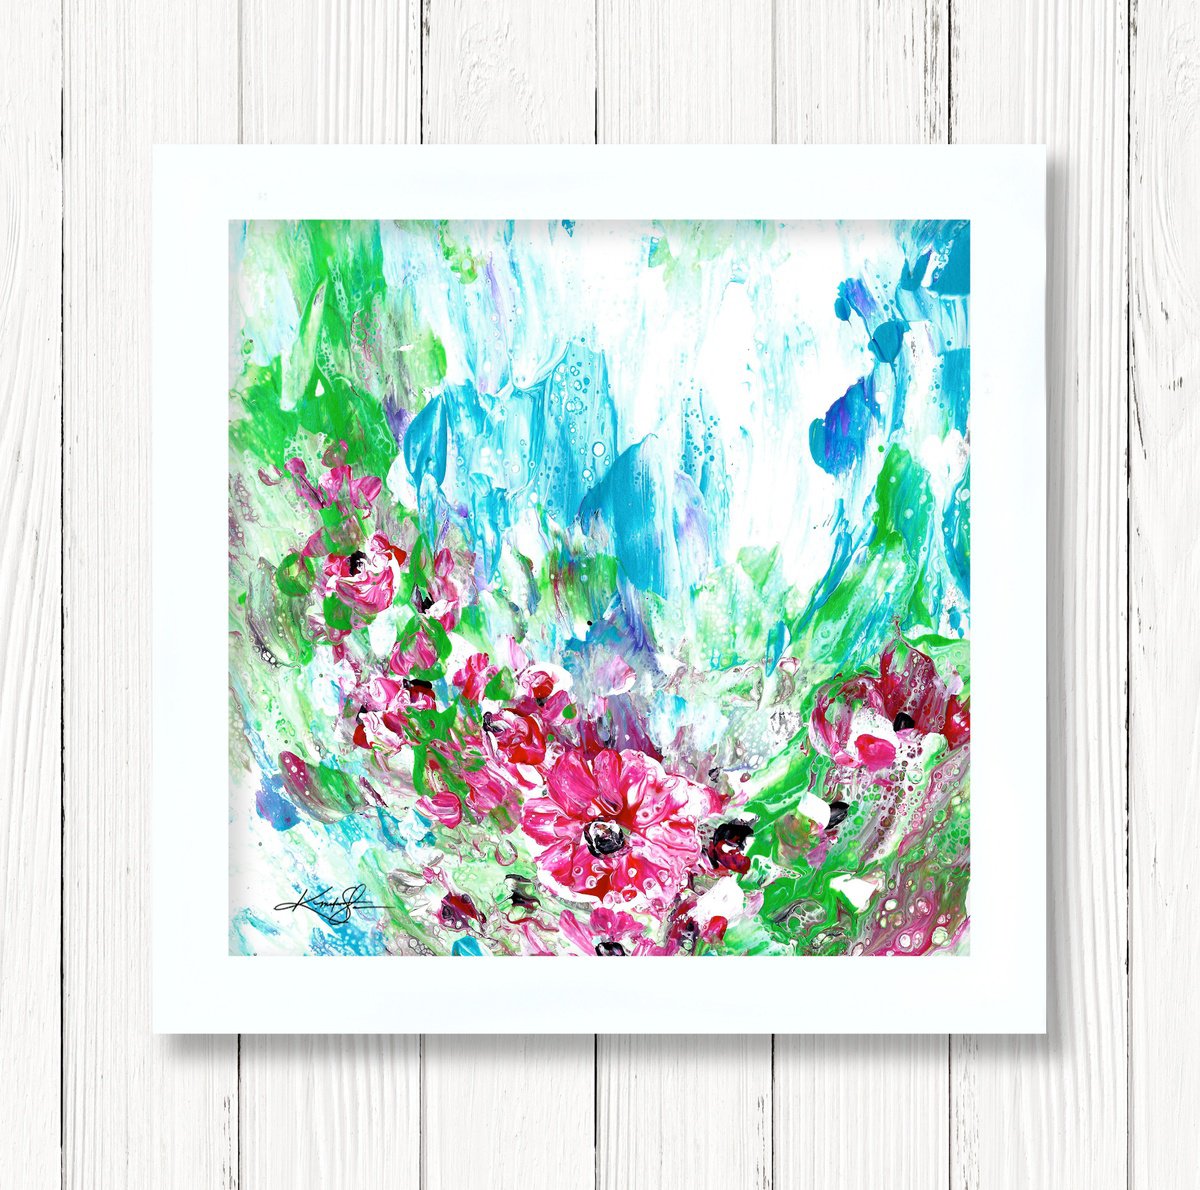 Floral Jubilee 42 - Framed Abstract Floral Art by Kathy Morton Stanion by Kathy Morton Stanion